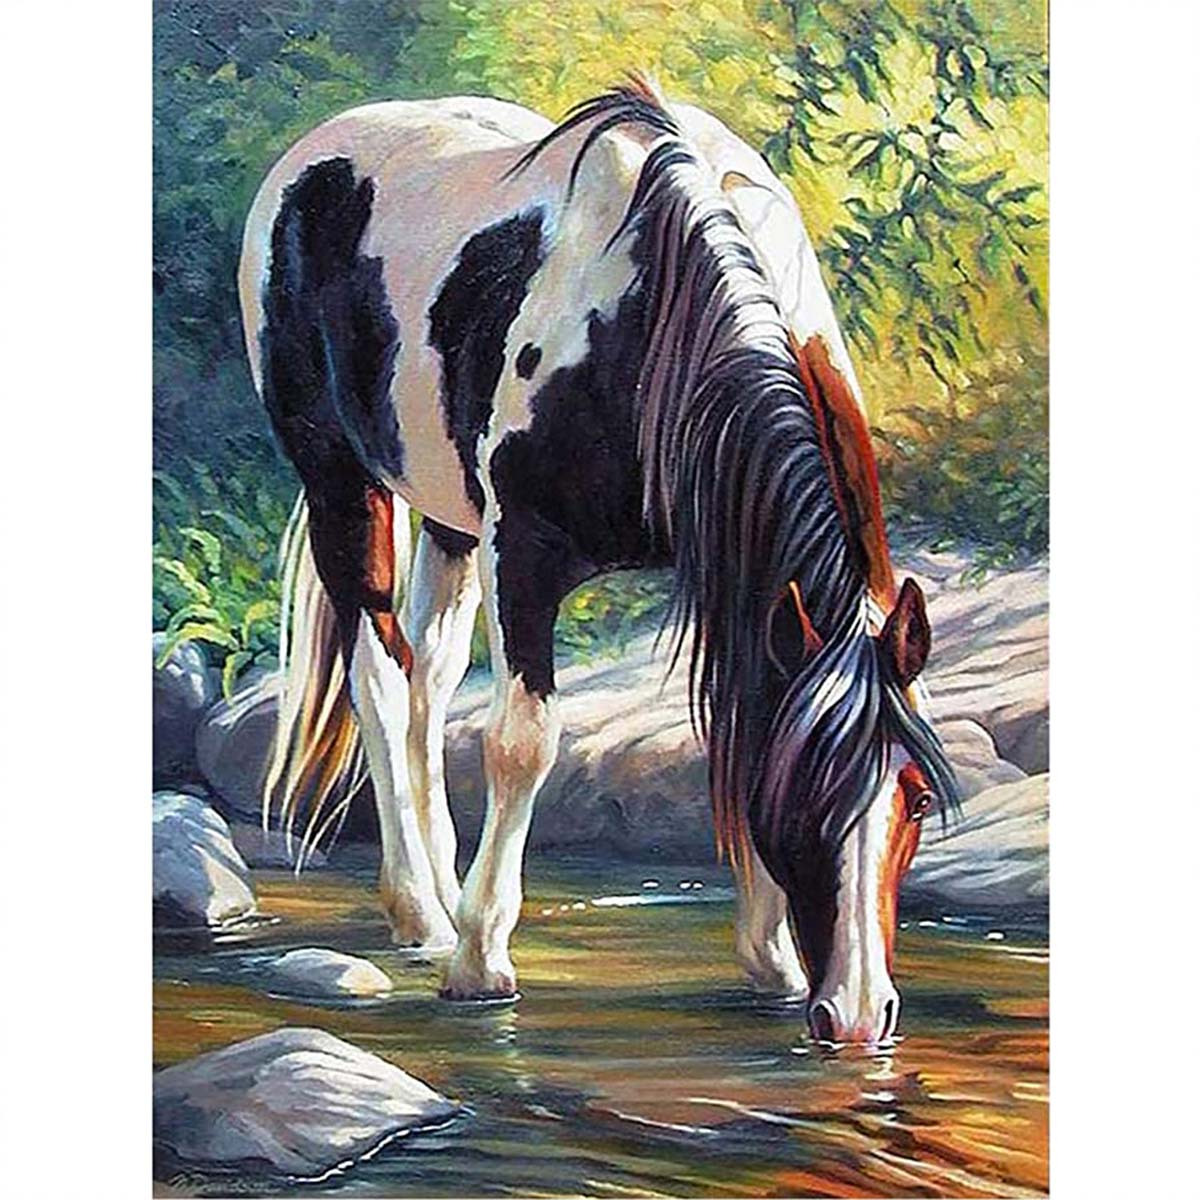 

1pc 5d Artificial Diamond Painting Kits Artificial Diamond Art For Adults Beginners, Drinking Horse Artificial Diamond Painting For Gift Home Wall Decor, 20x30cm/7.9x11.8in, Frameless